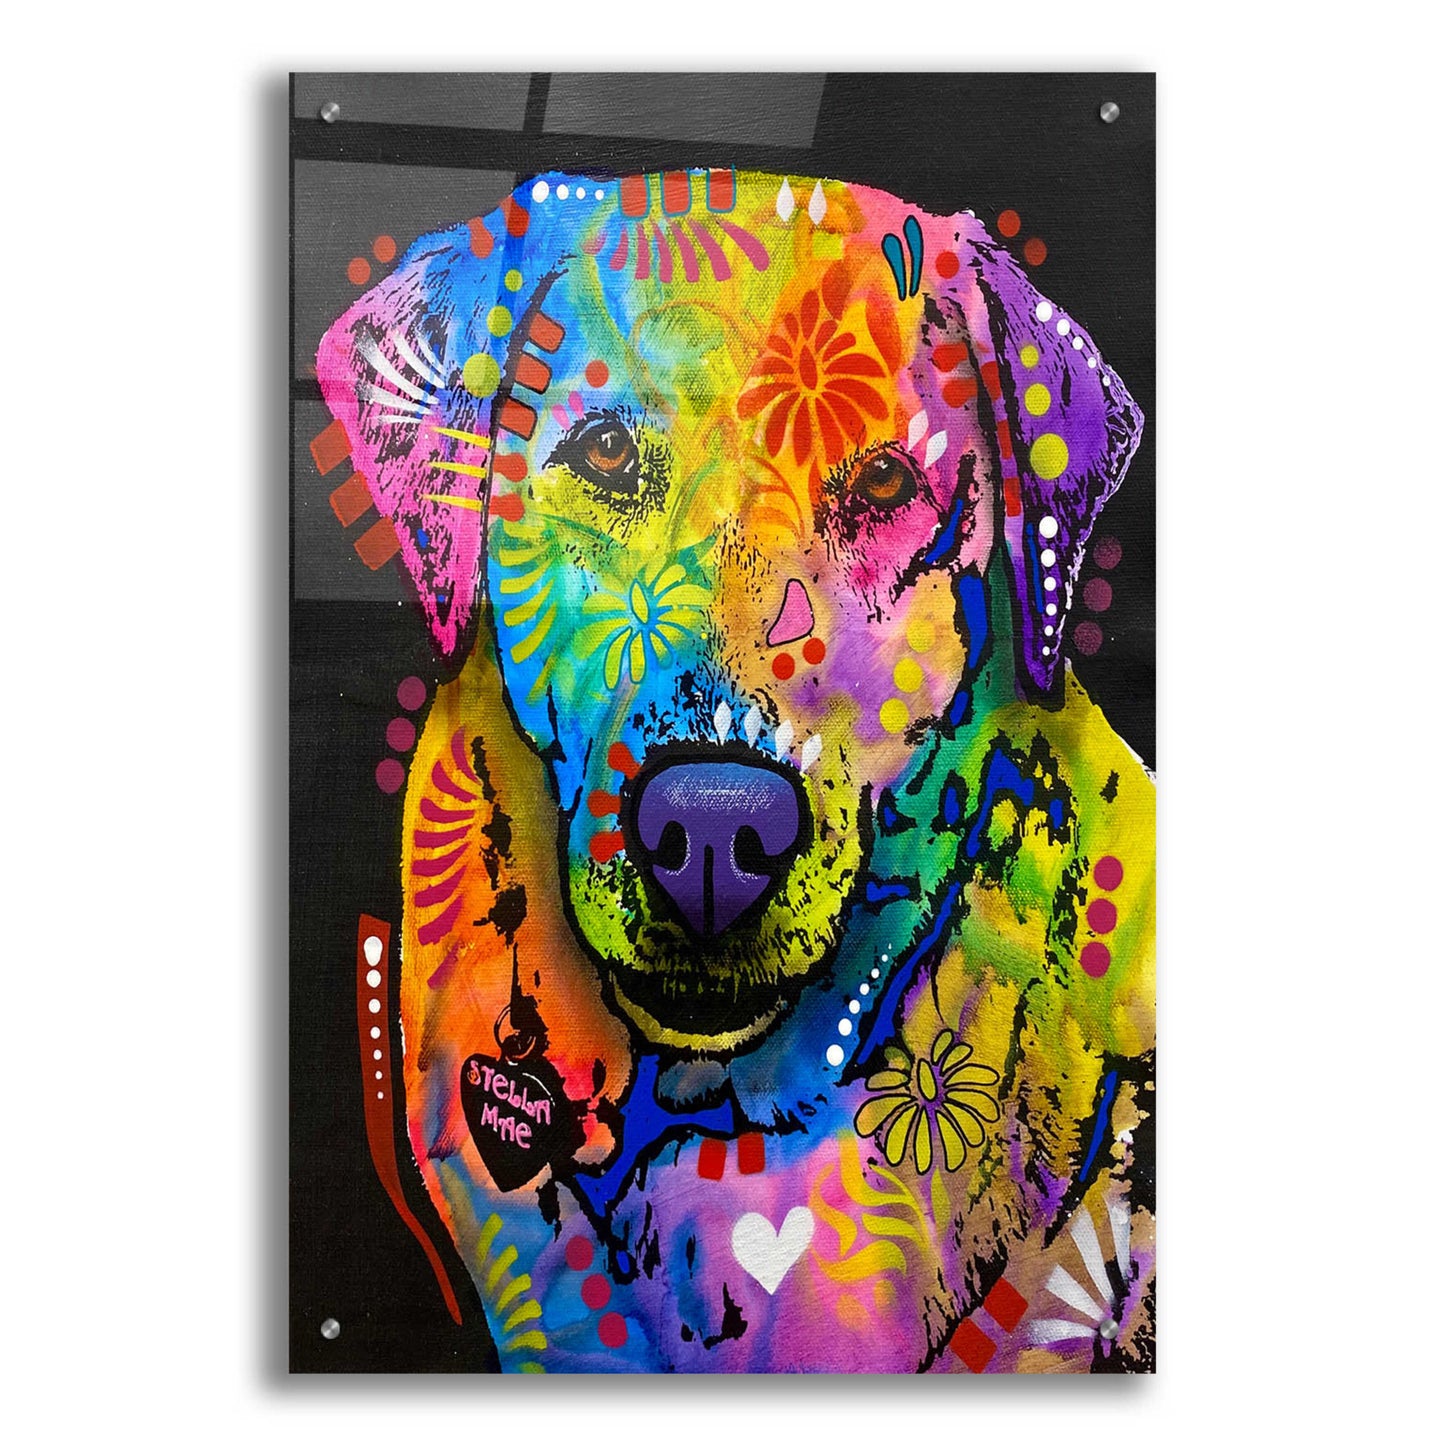 Epic Art 'Don't Do A Thing But Run Around' by Dean Russo, Acrylic Glass Wall Art,24x36